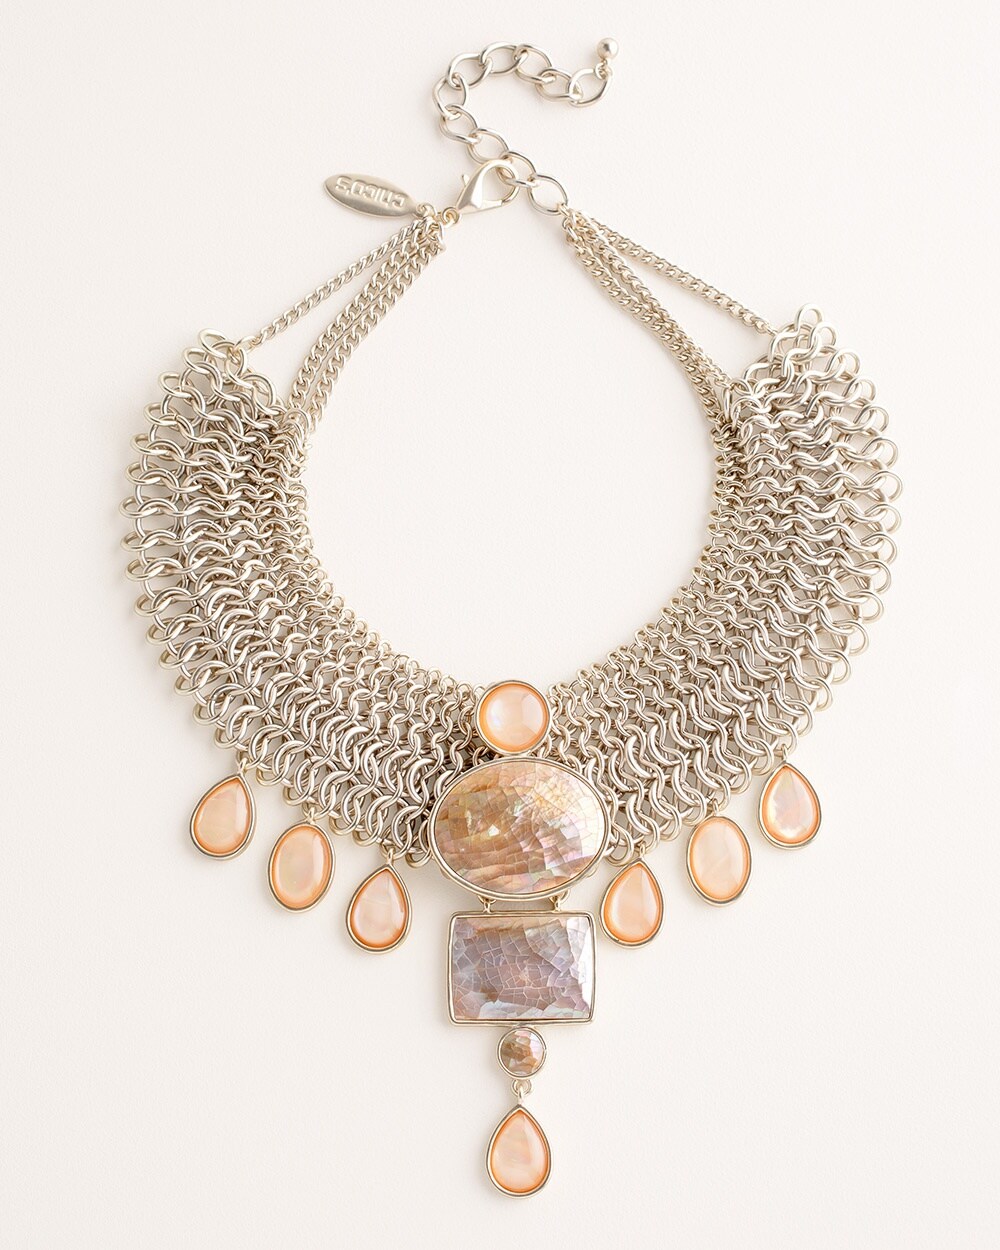 Pink and Silvertone Bib Necklace